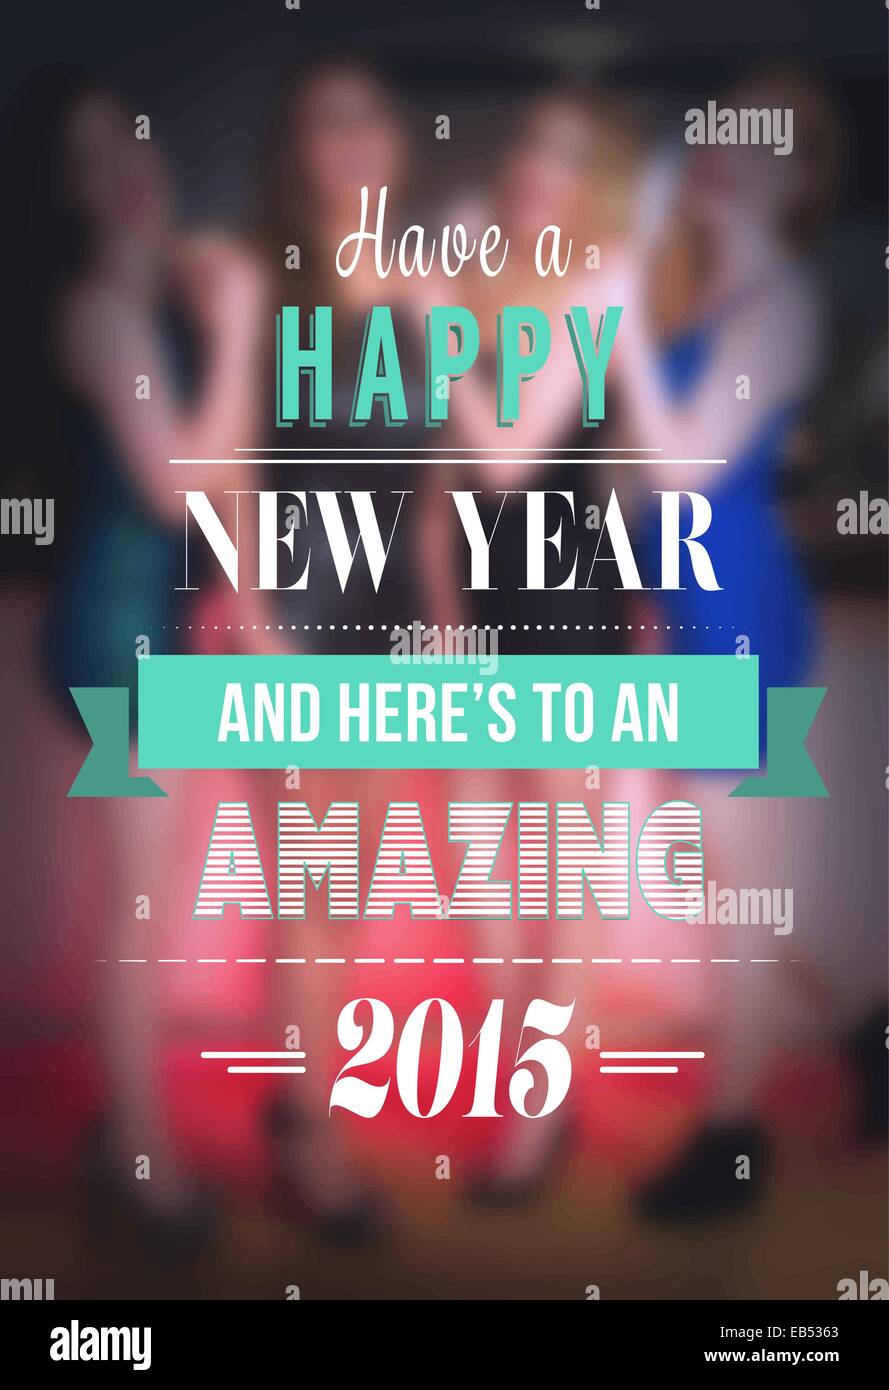 New Years Message Against Blurred Pretty Friends Vector Stock Vector Image Art Alamy